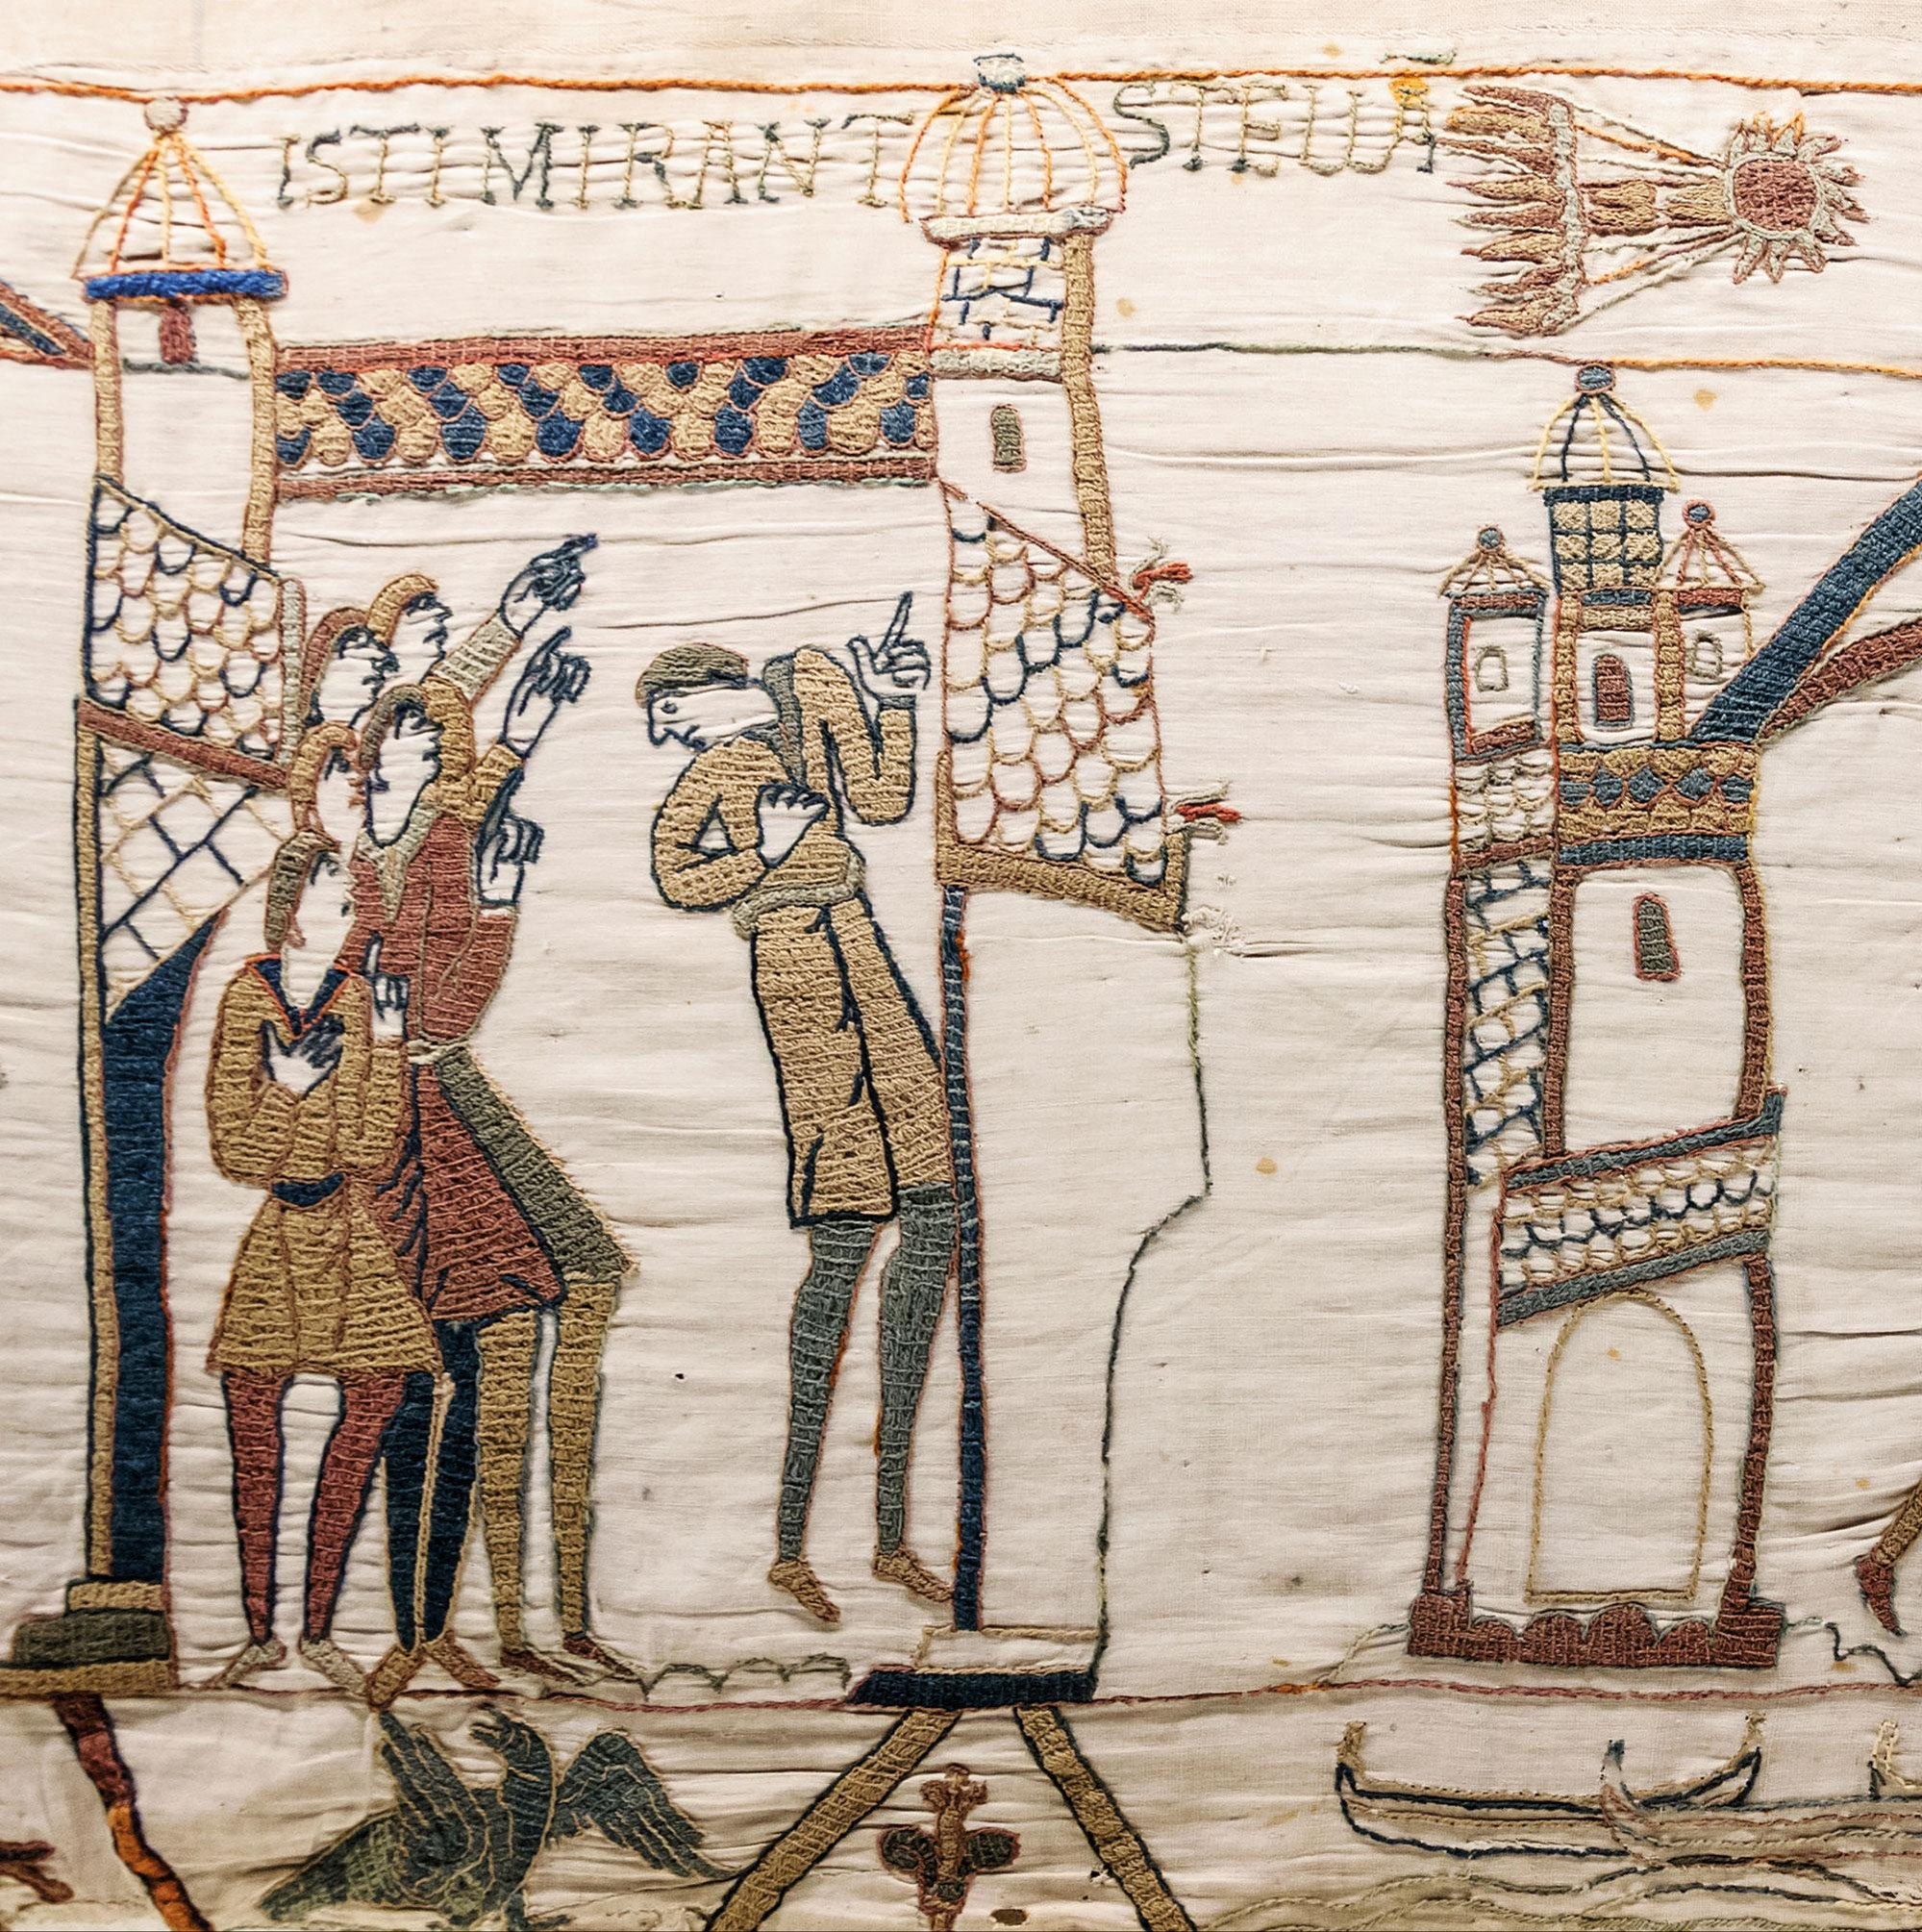 The Bayeux Tapestry - oldest depiction of Halley’s Comet